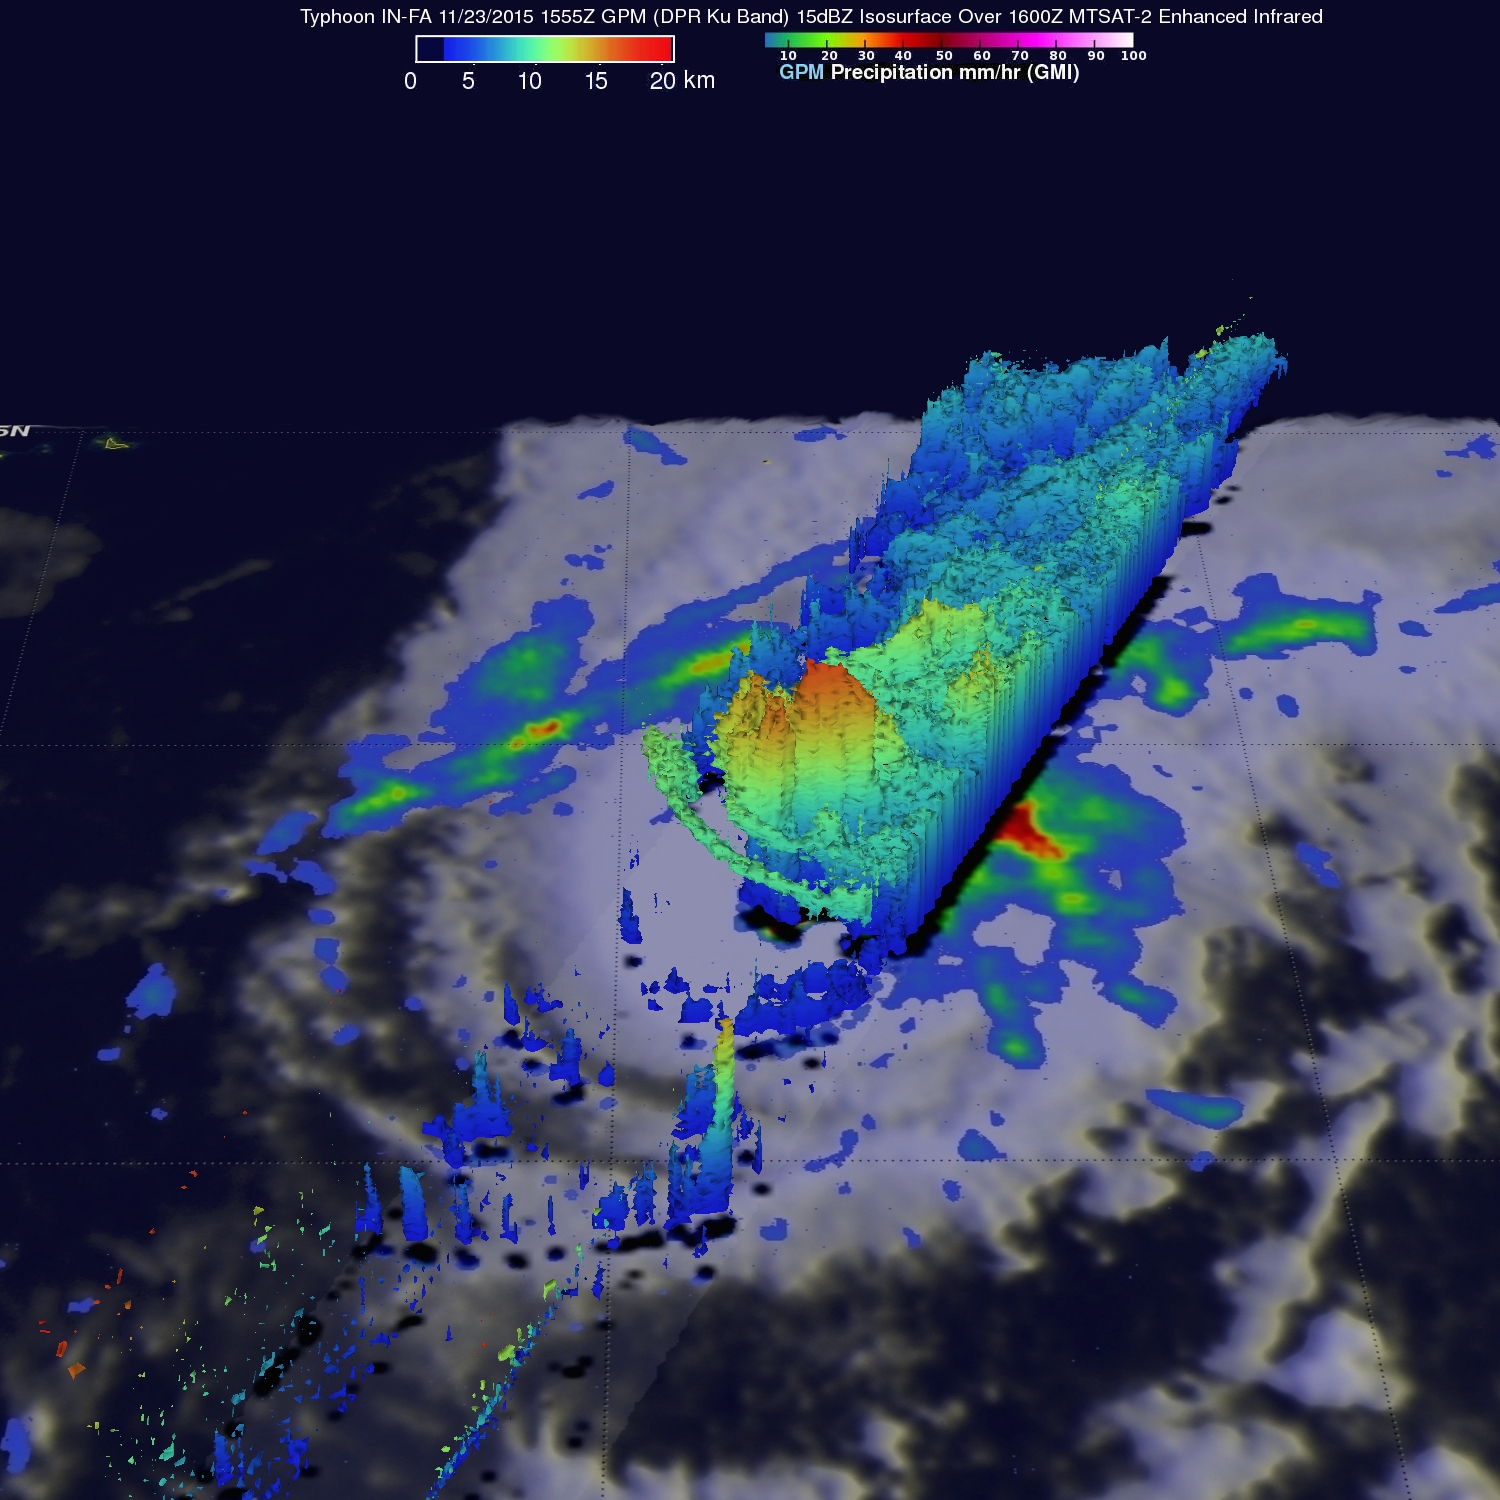 Typhoon IN-FA's Extreme Rainfall Measured By GPM